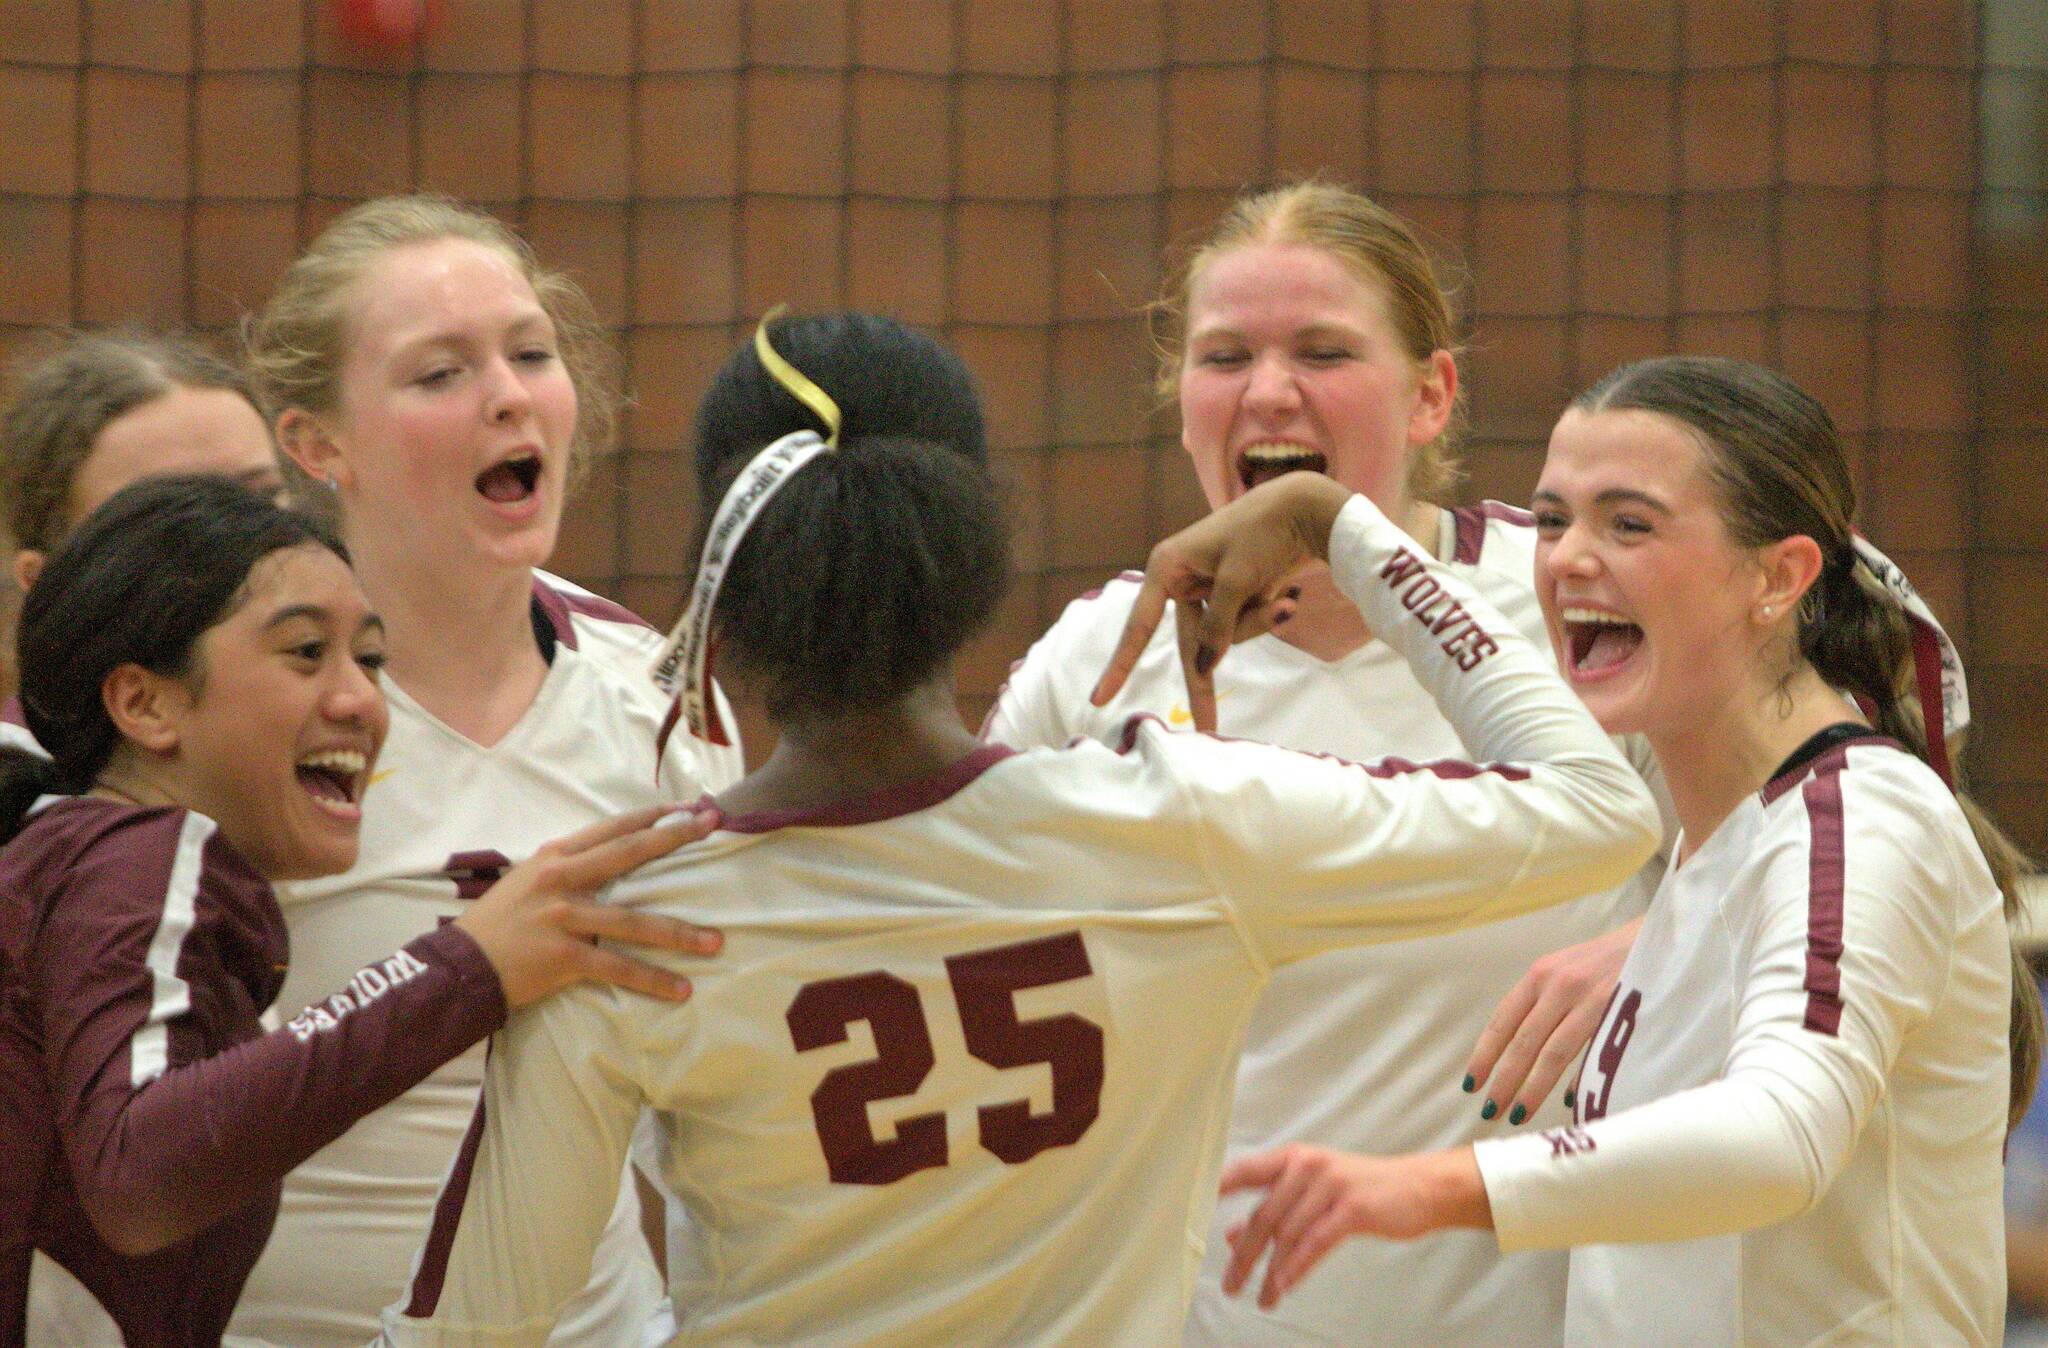 Elisha Meyer/Kitsap News Group
South Kitsap players celebrate after taking another early point in the second set of their Sept. 26 match versus Curtis.